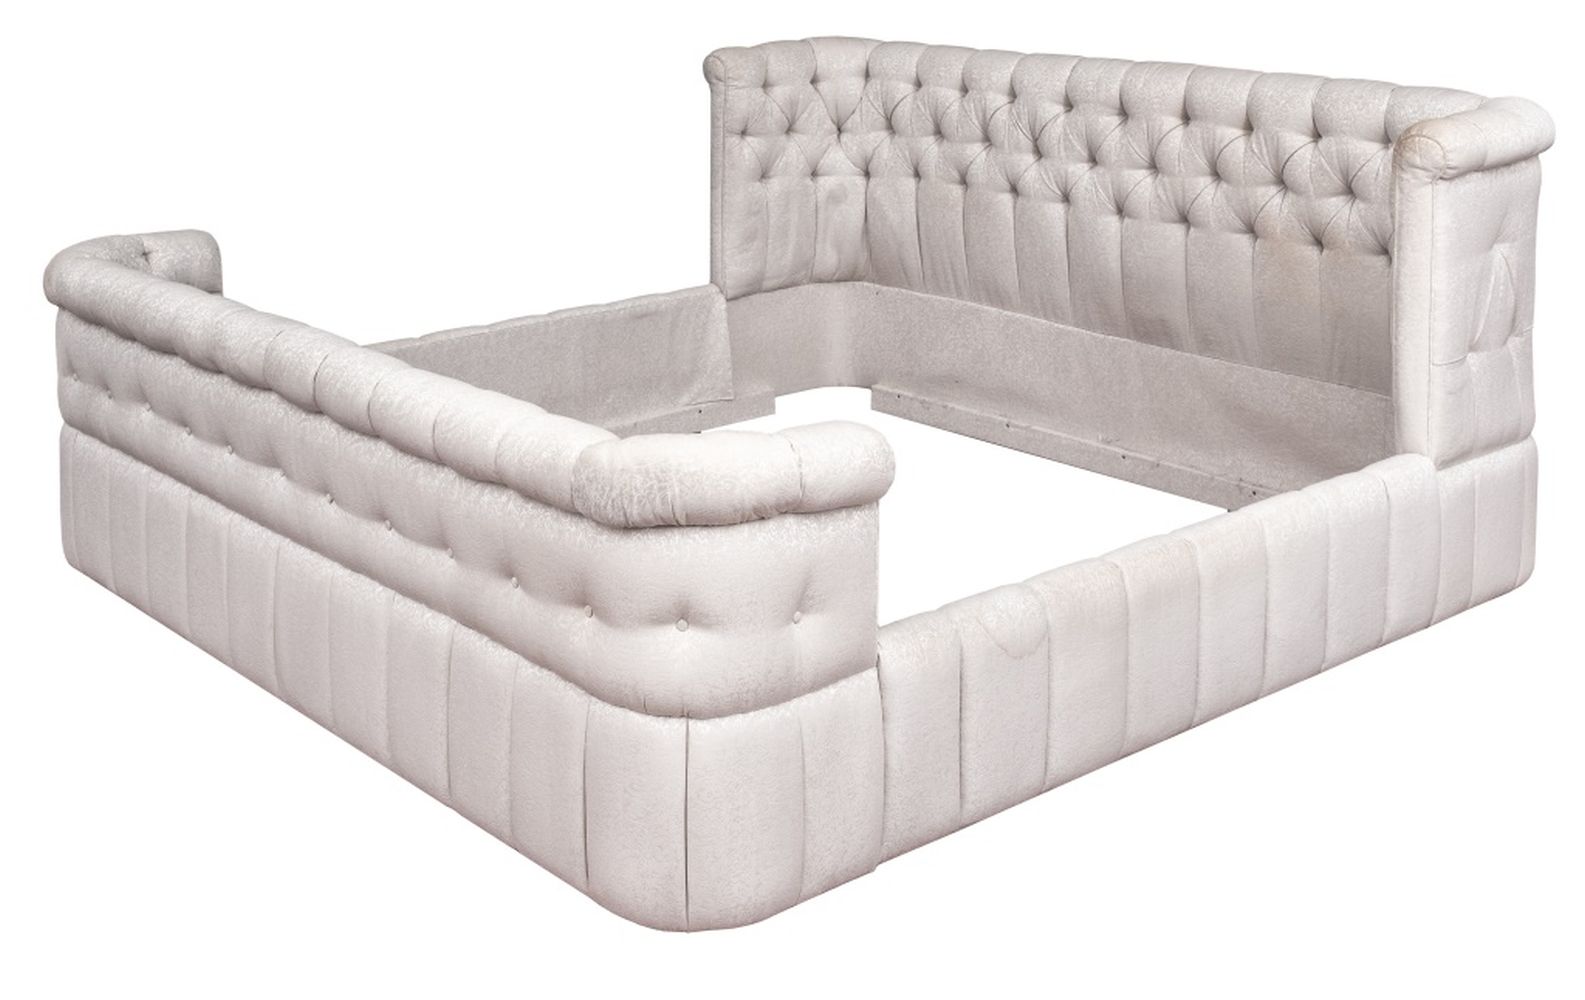 BEIGE UPHOLSTERED BUTTONED KING 3b4cb3